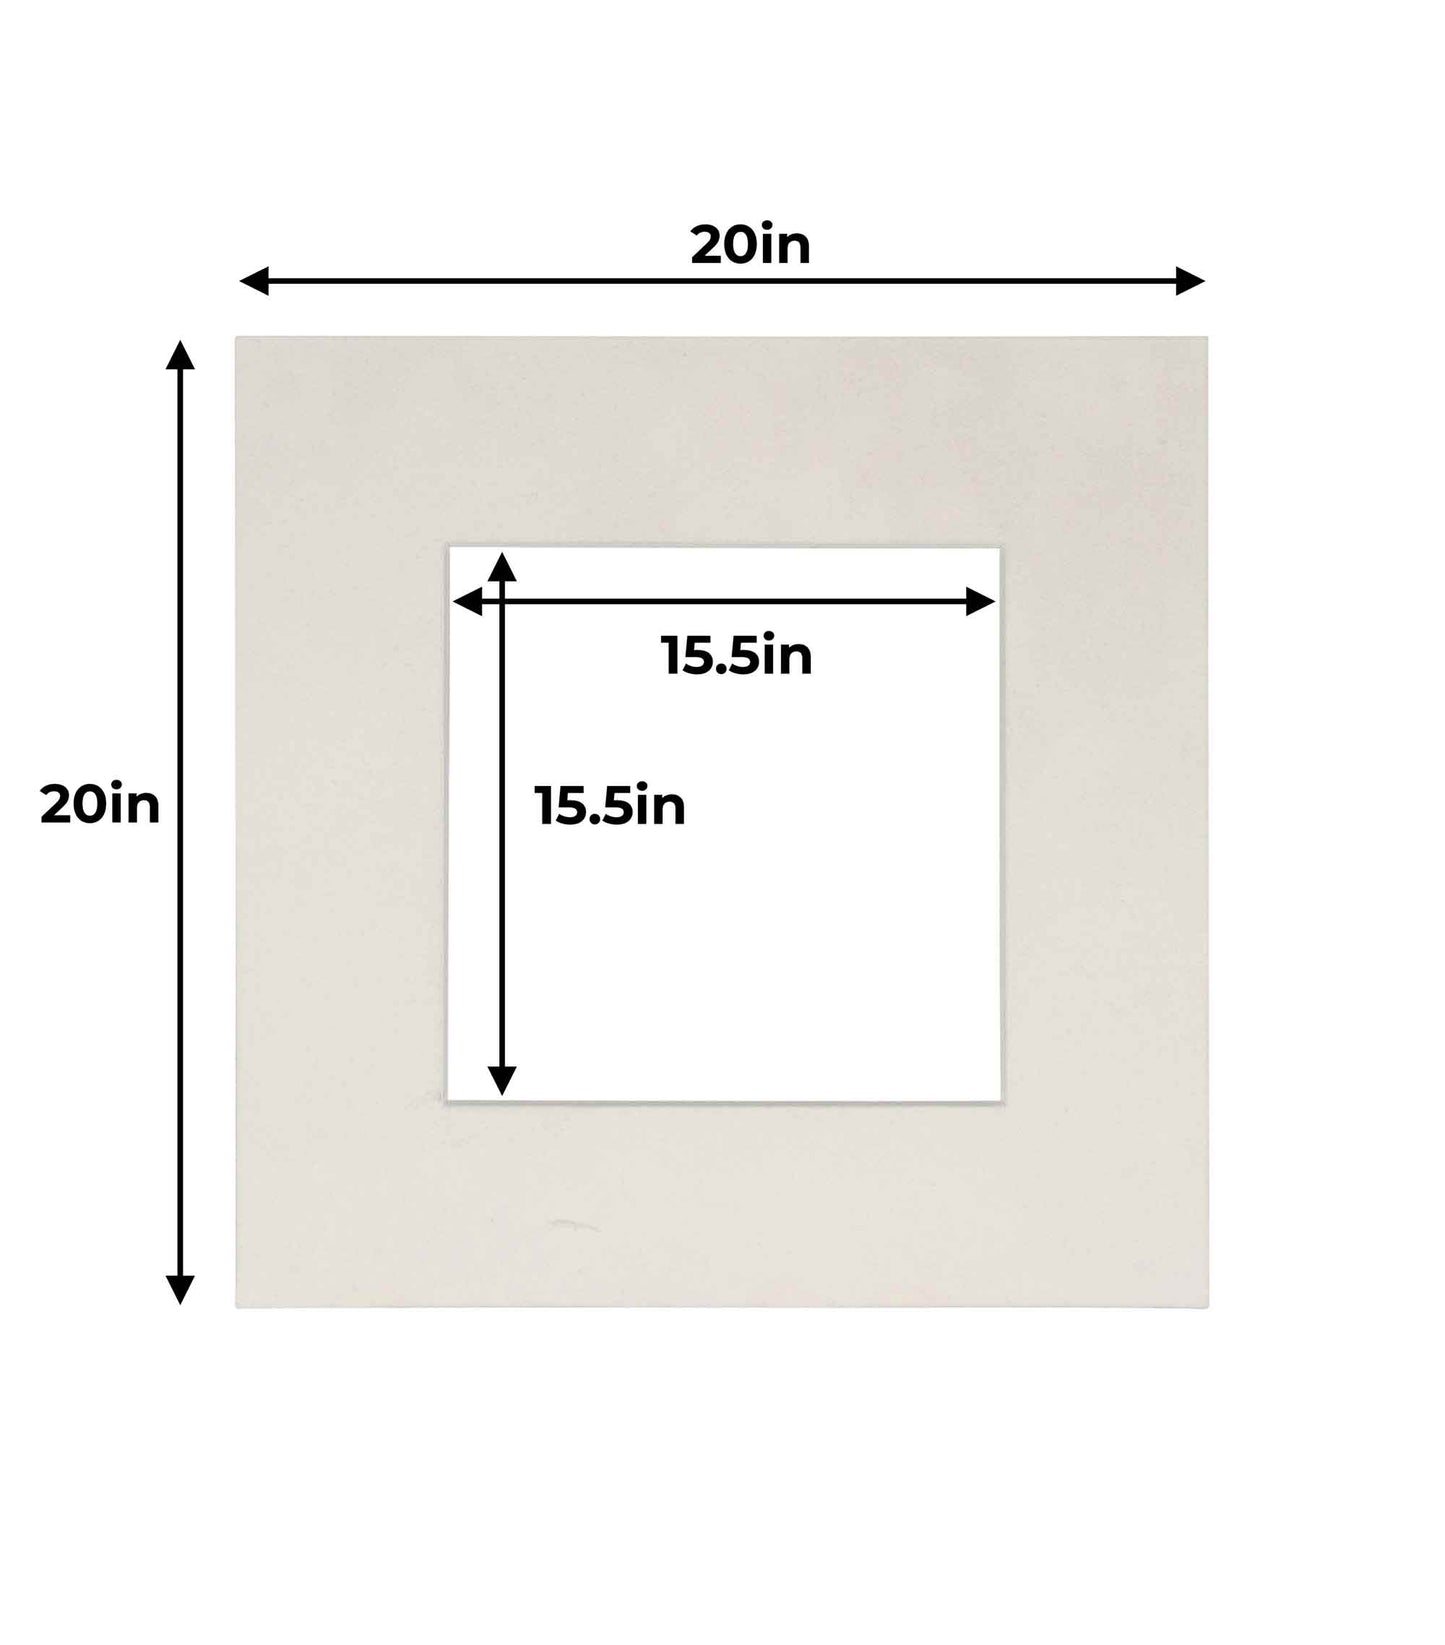 Pack of 10 White Suede Precut Acid-Free Matboards